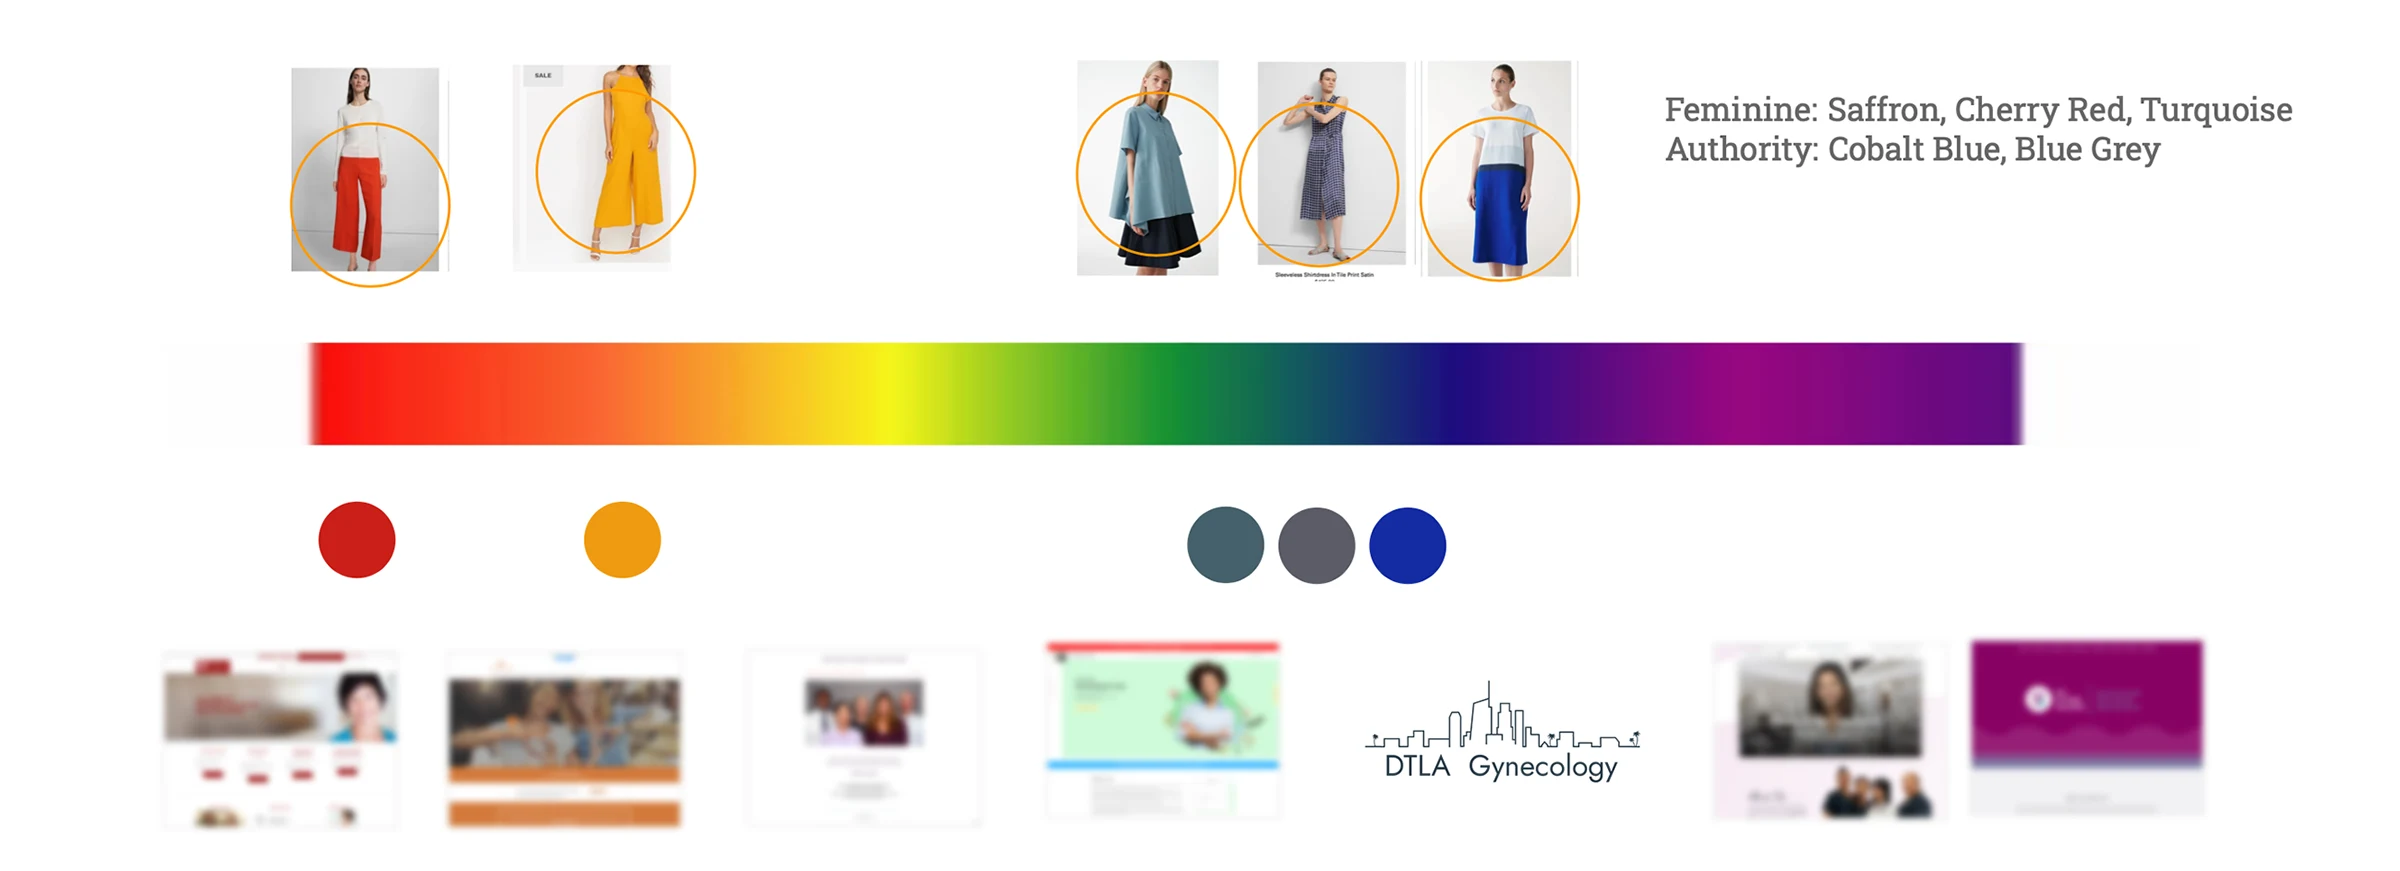 The color strategy mapped competitors' branding colors to find a gap in the blue spectrum.